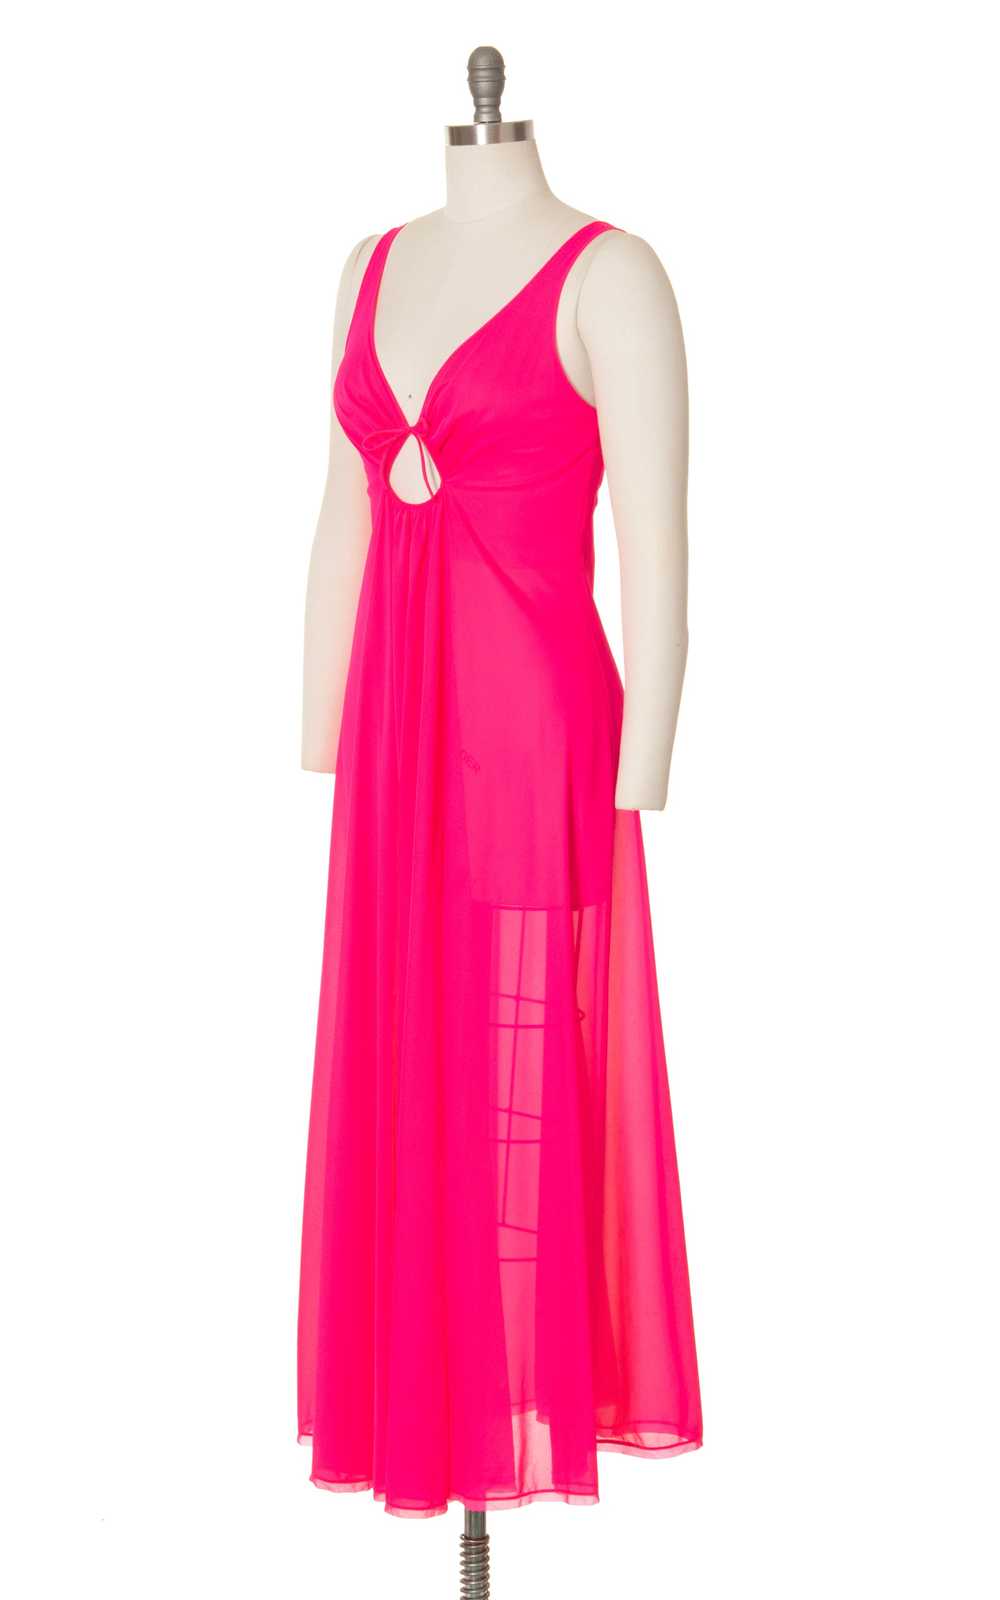 1970s Neon Hot Pink Nightgown | small/medium/large - image 5